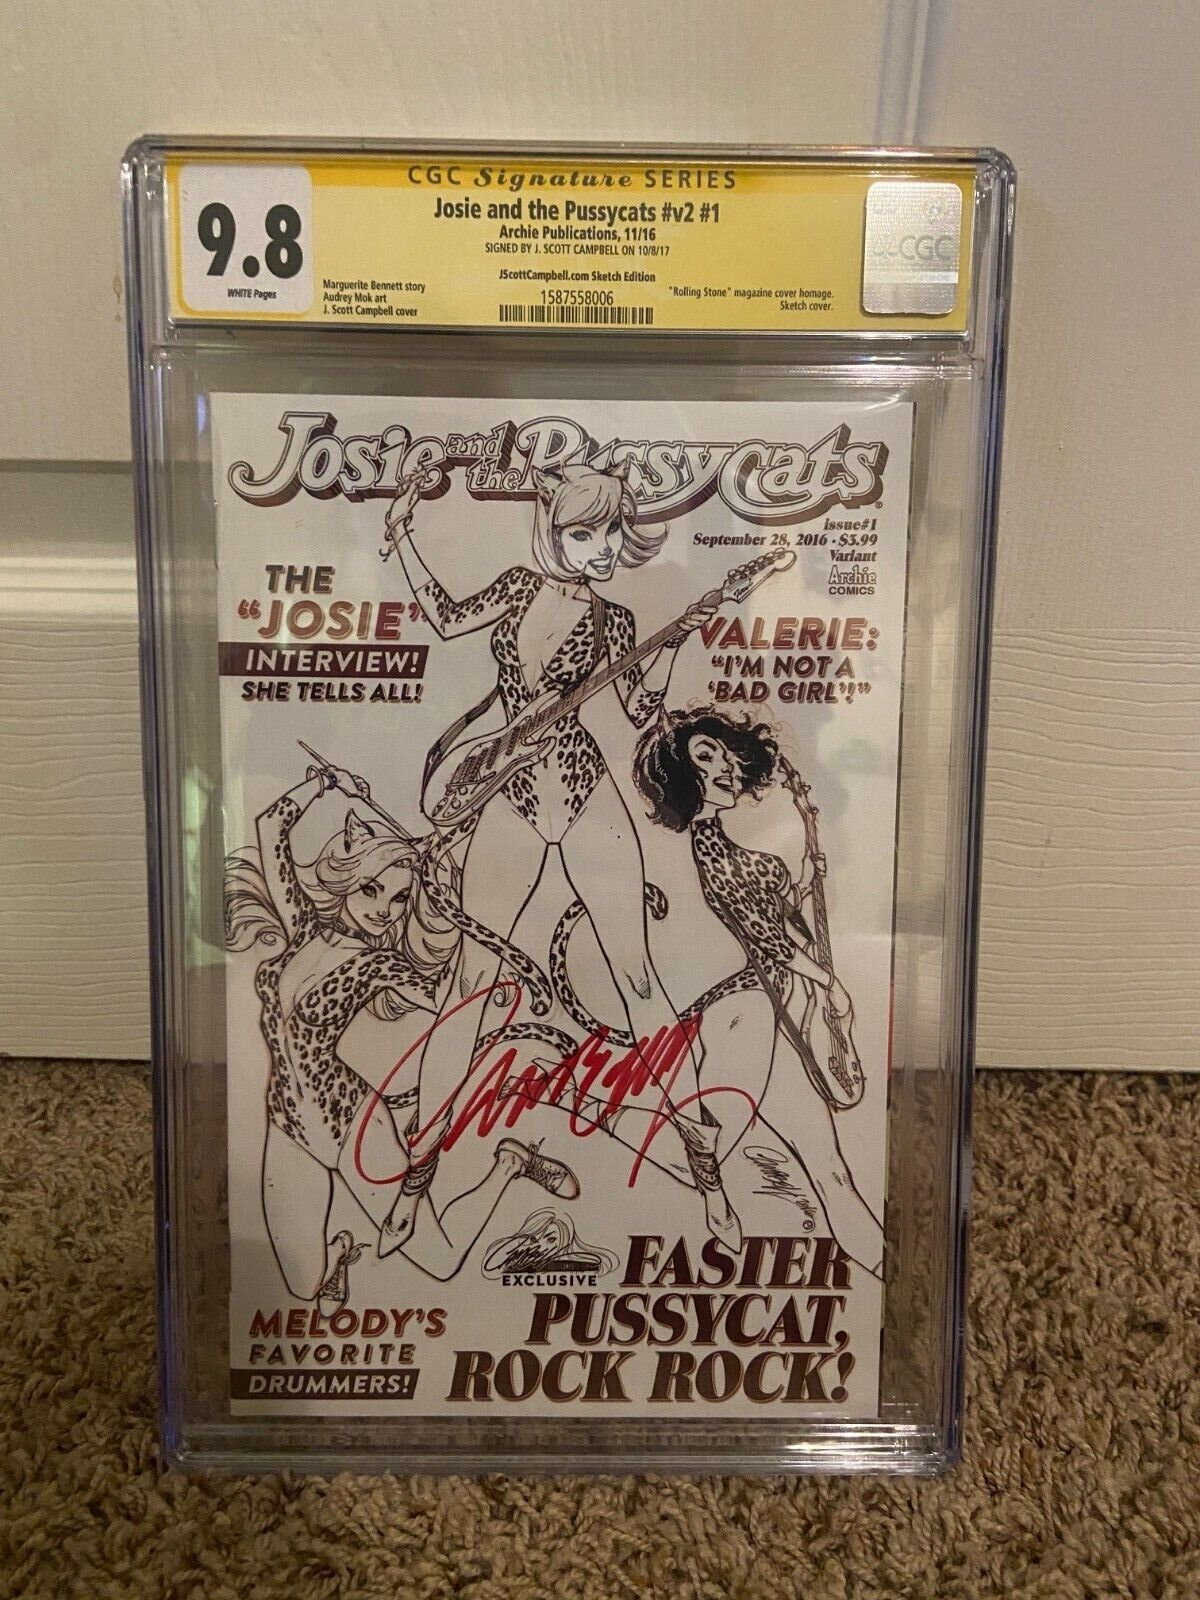 Josie and the Pussycats V2 #1 CGC 9.8 SS J. Scott Campbell Rolling Stones 